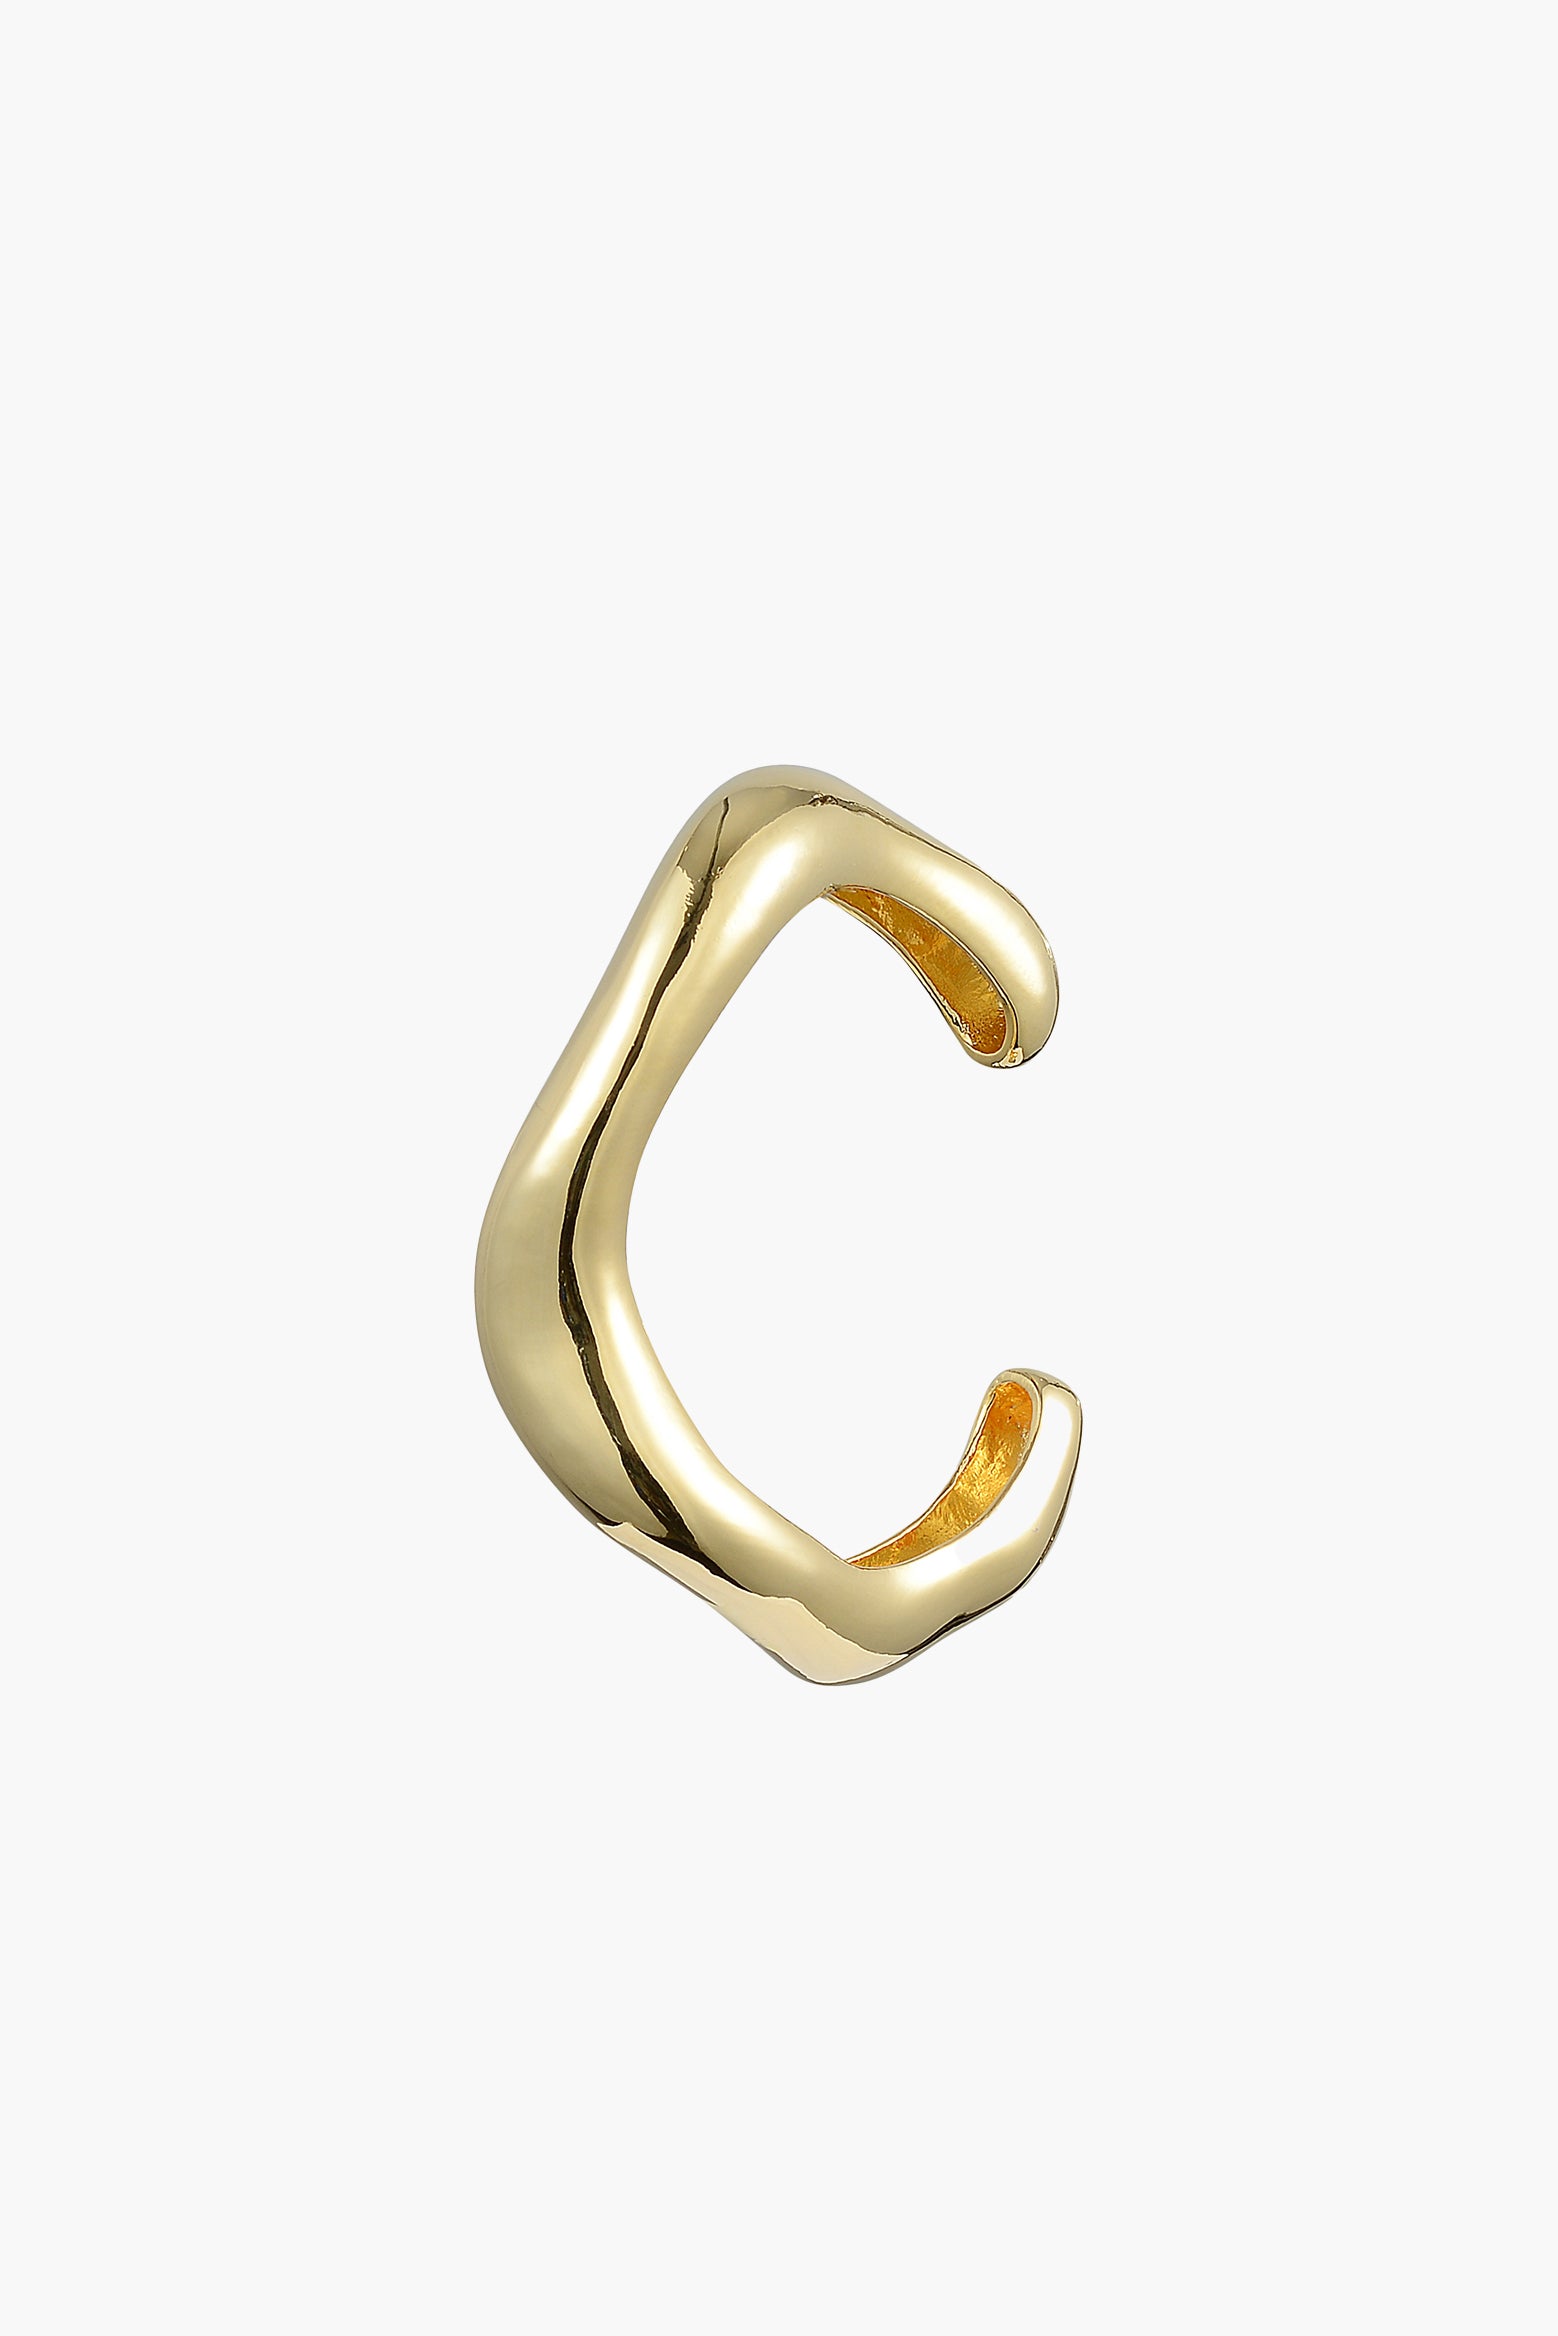 Anna Rossi Wave Bangle in Gold available at The New Trend Australia.